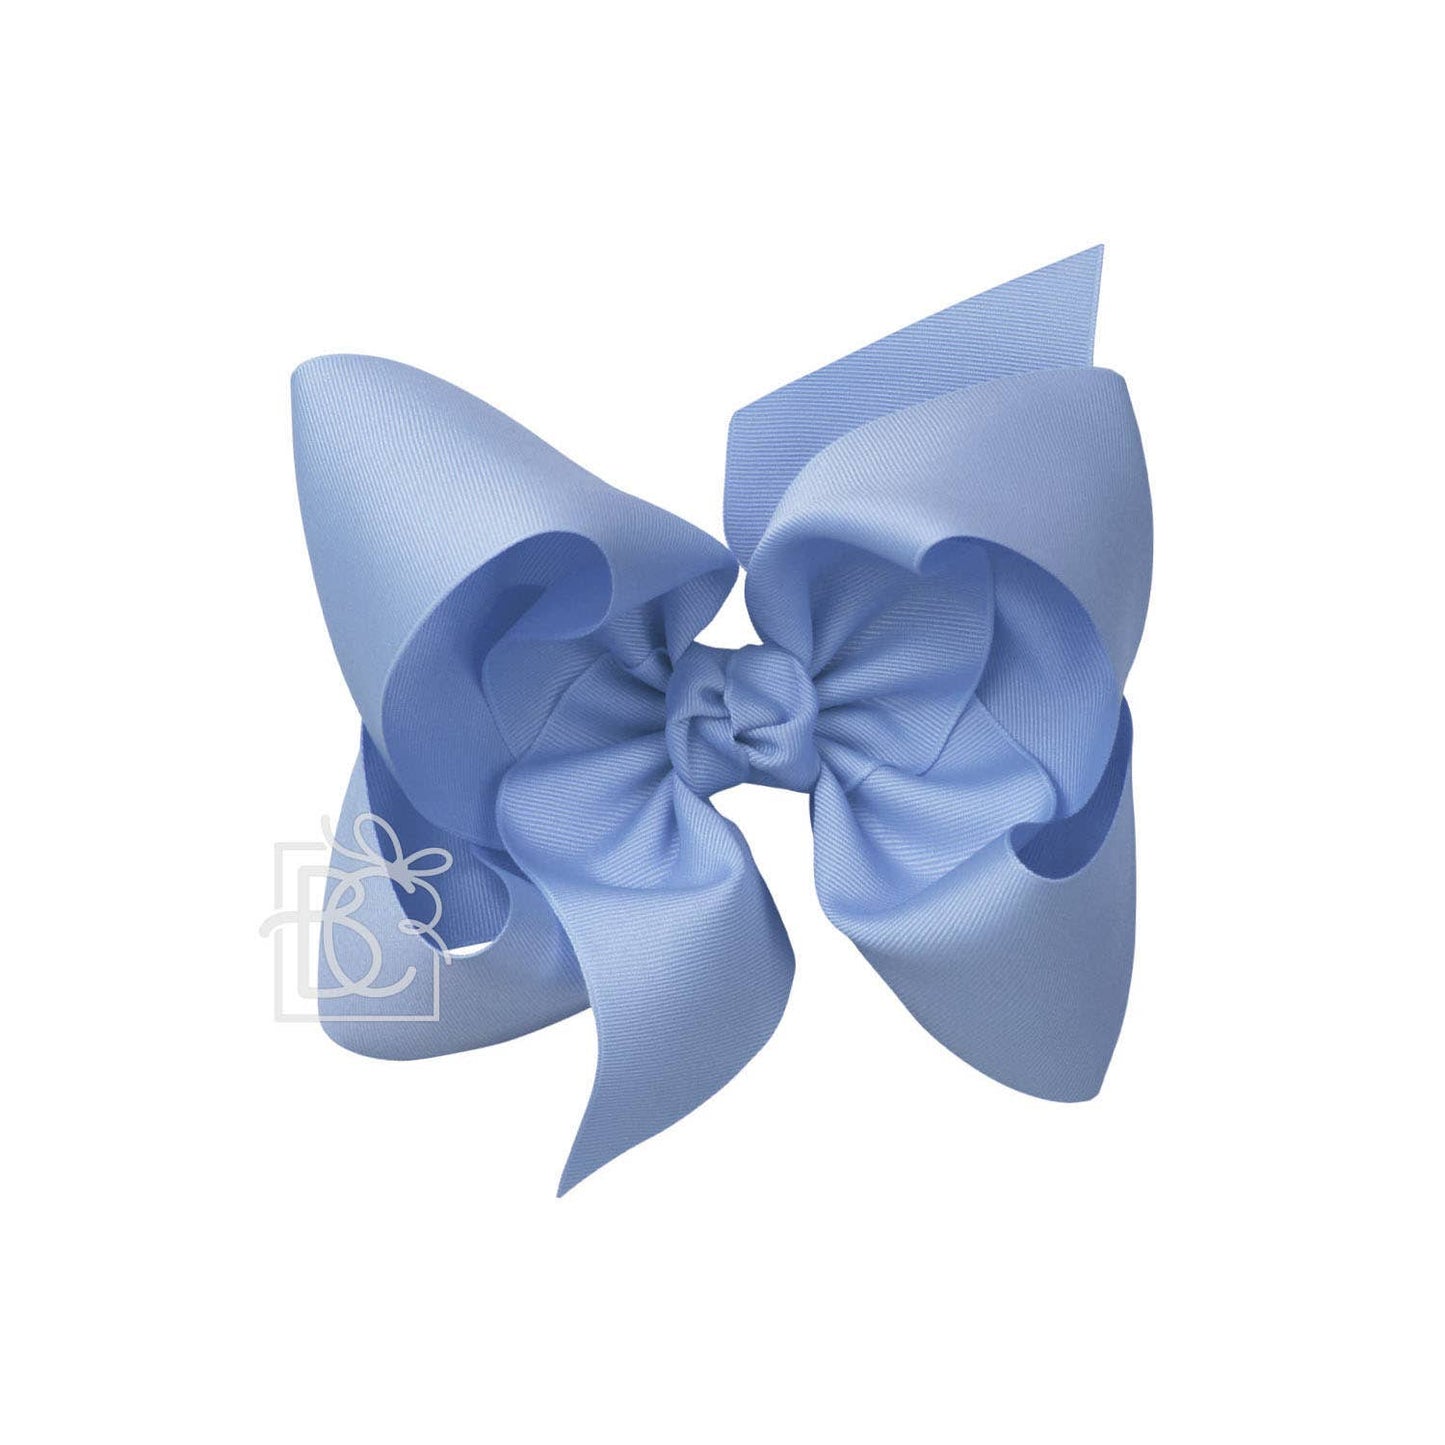 Texas Sized Bow in Bluebird  - Doodlebug's Children's Boutique